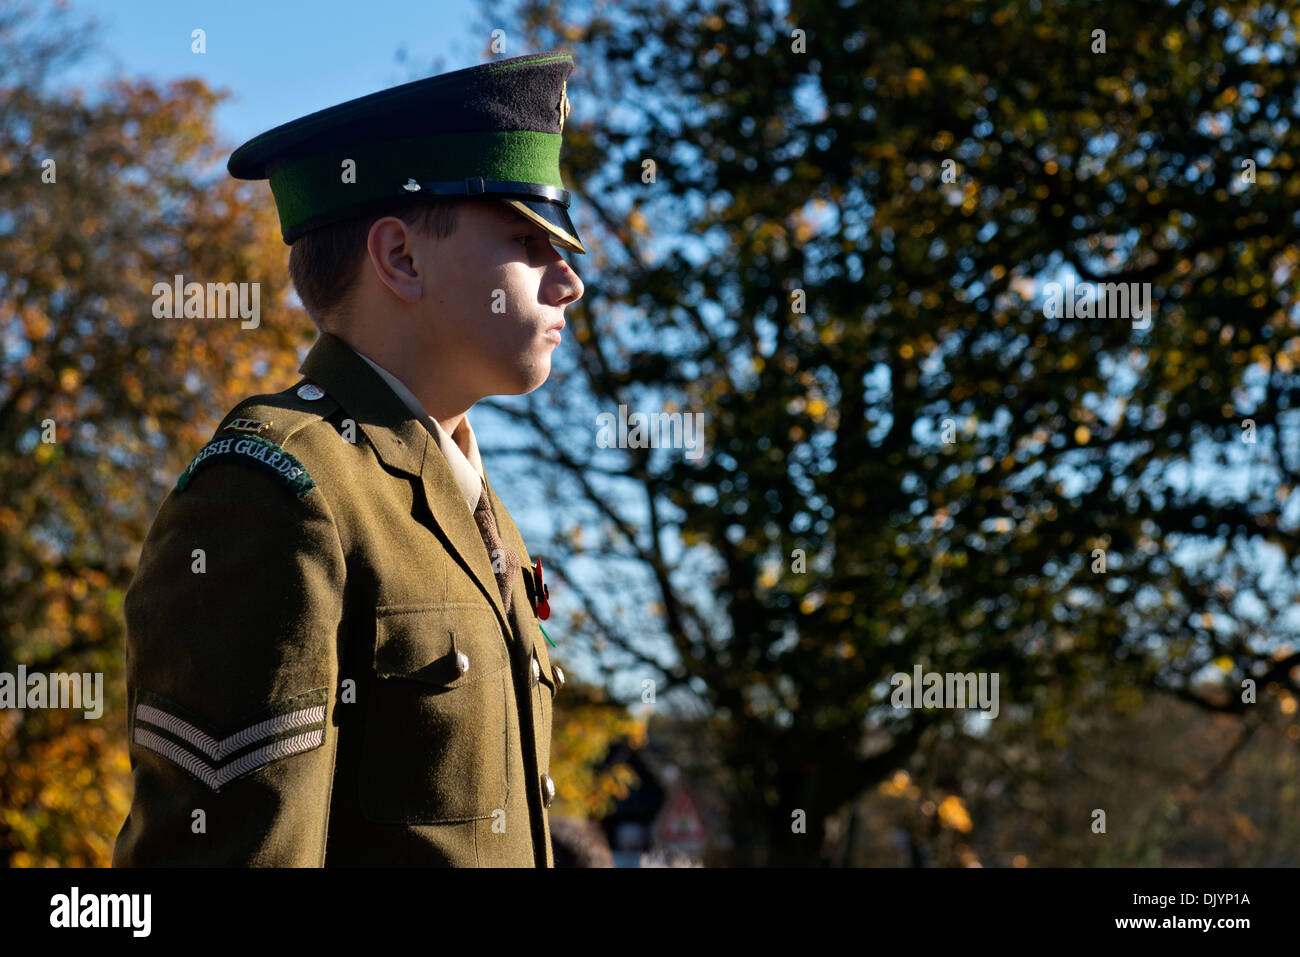 Model released image of an Army Cadet on duty during the Remembrance Service in Hemel Hempstead. Stock Photo